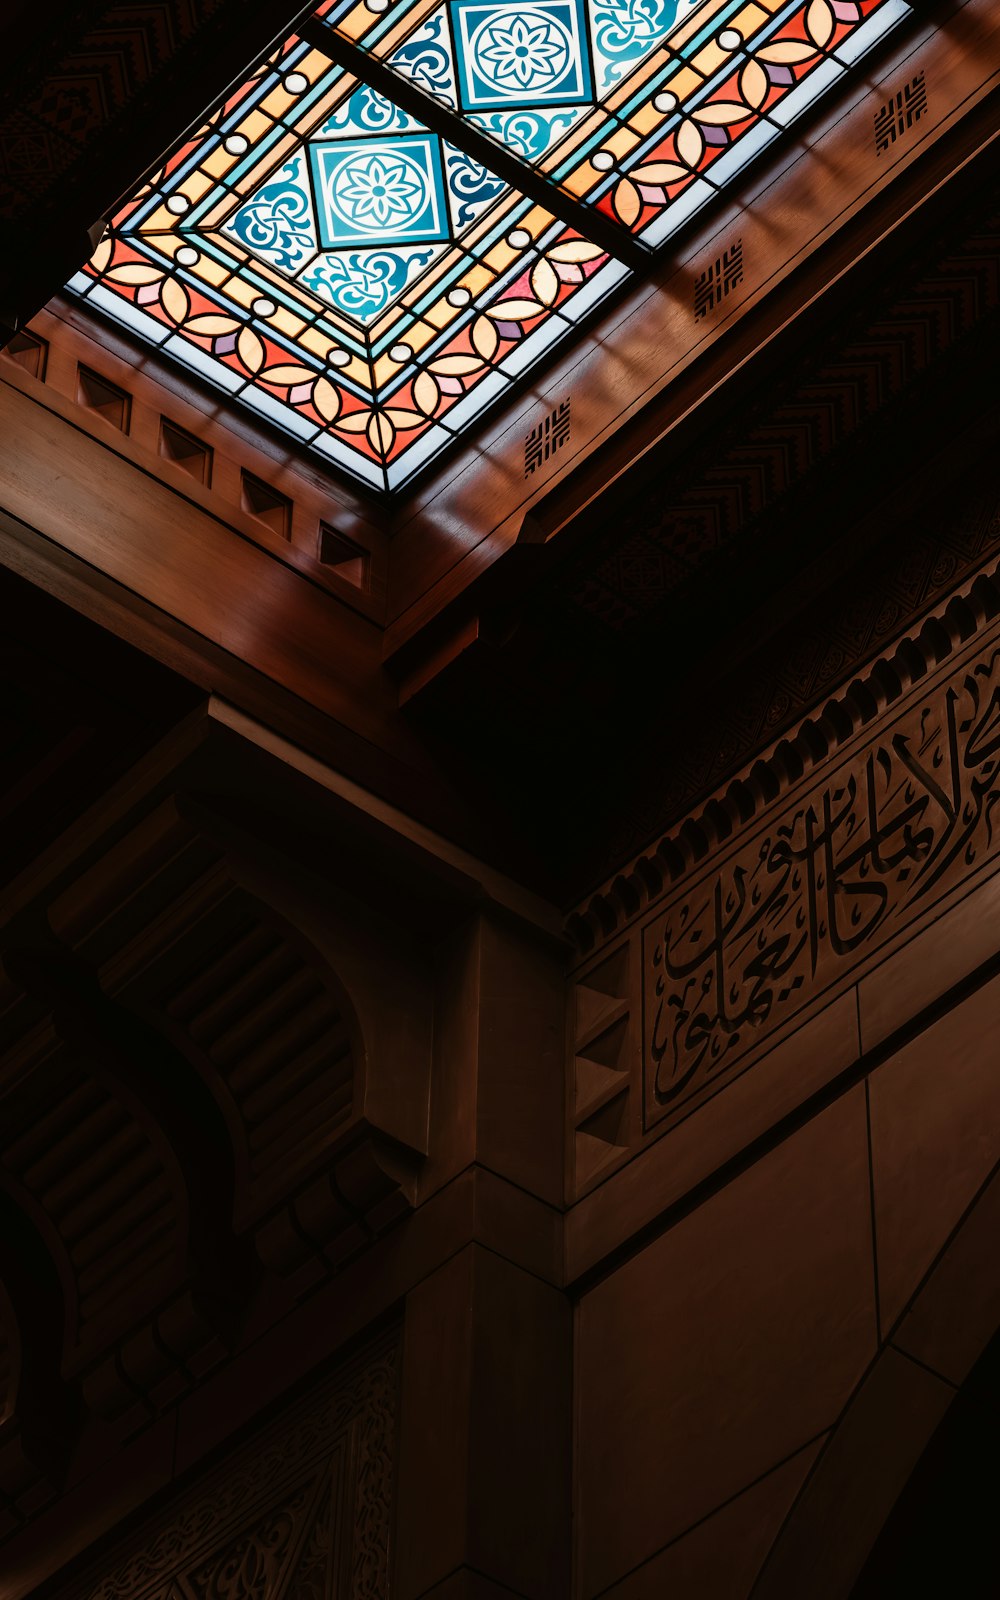 a stained glass window in the ceiling of a building